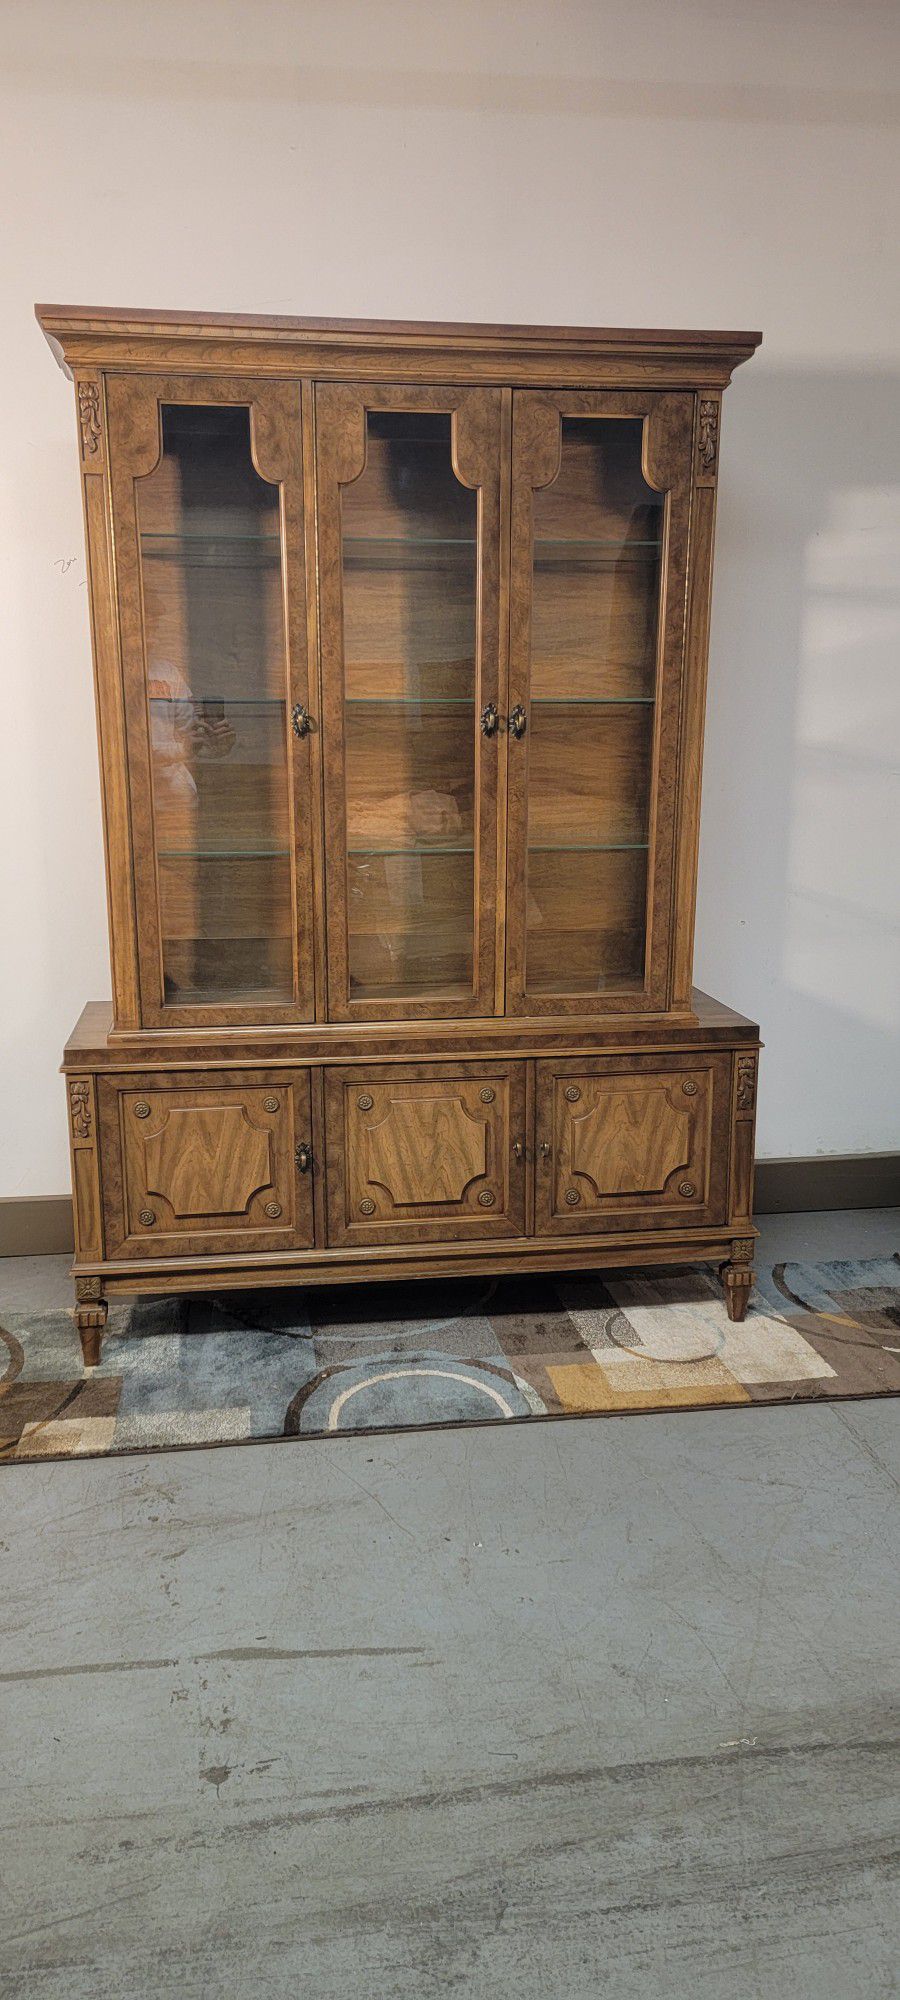 Free Local Delivery! Vintage Young Manufacturer China Cabinet Hutch